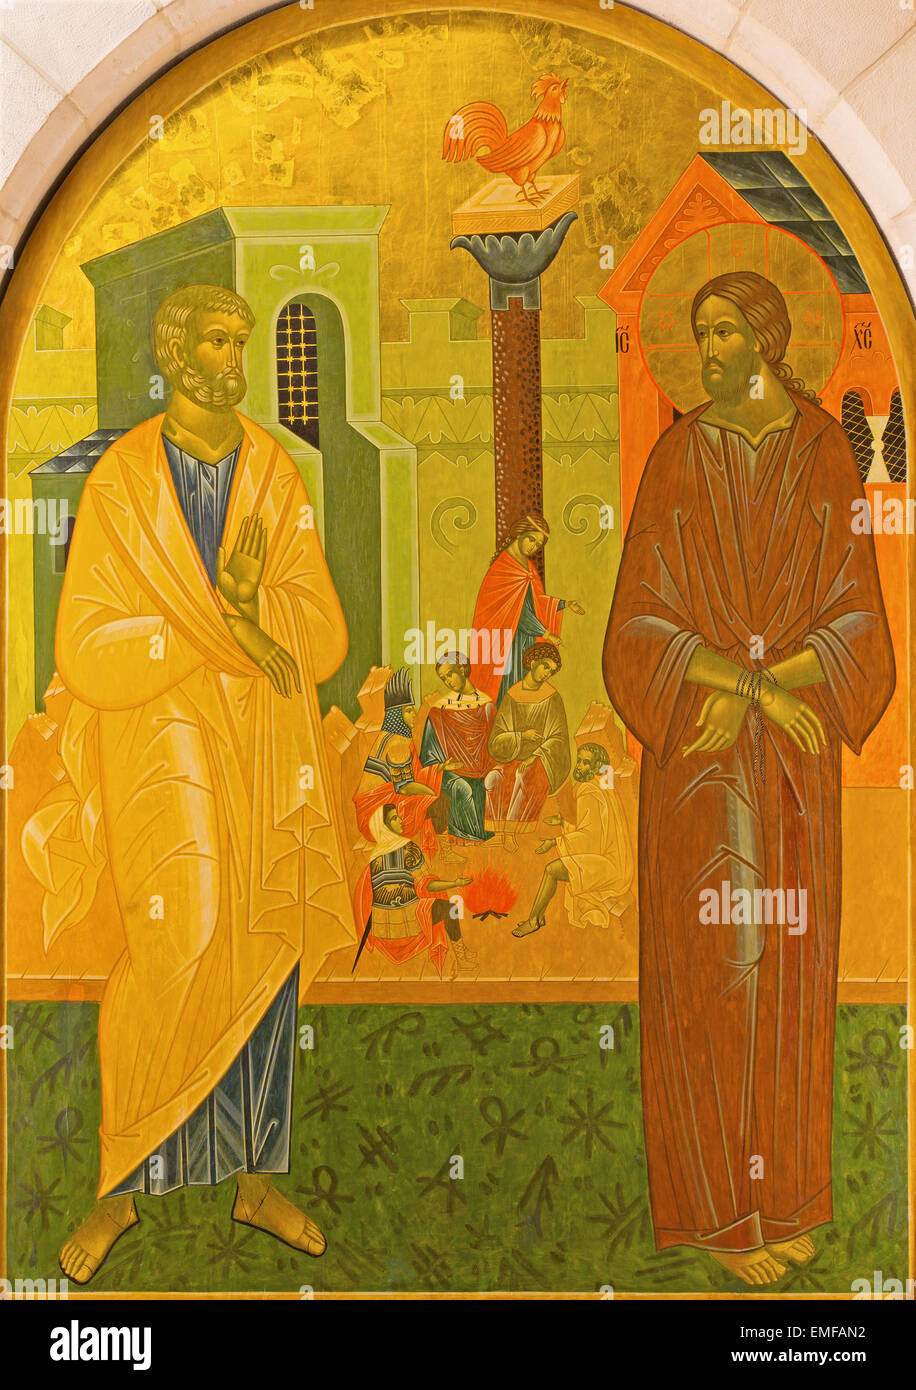 JERUSALEM, ISRAEL - MARCH 3, 2015: The Peter Disowns Jesus. Icon in Church of St. Peter in Gallicantu. Stock Photo